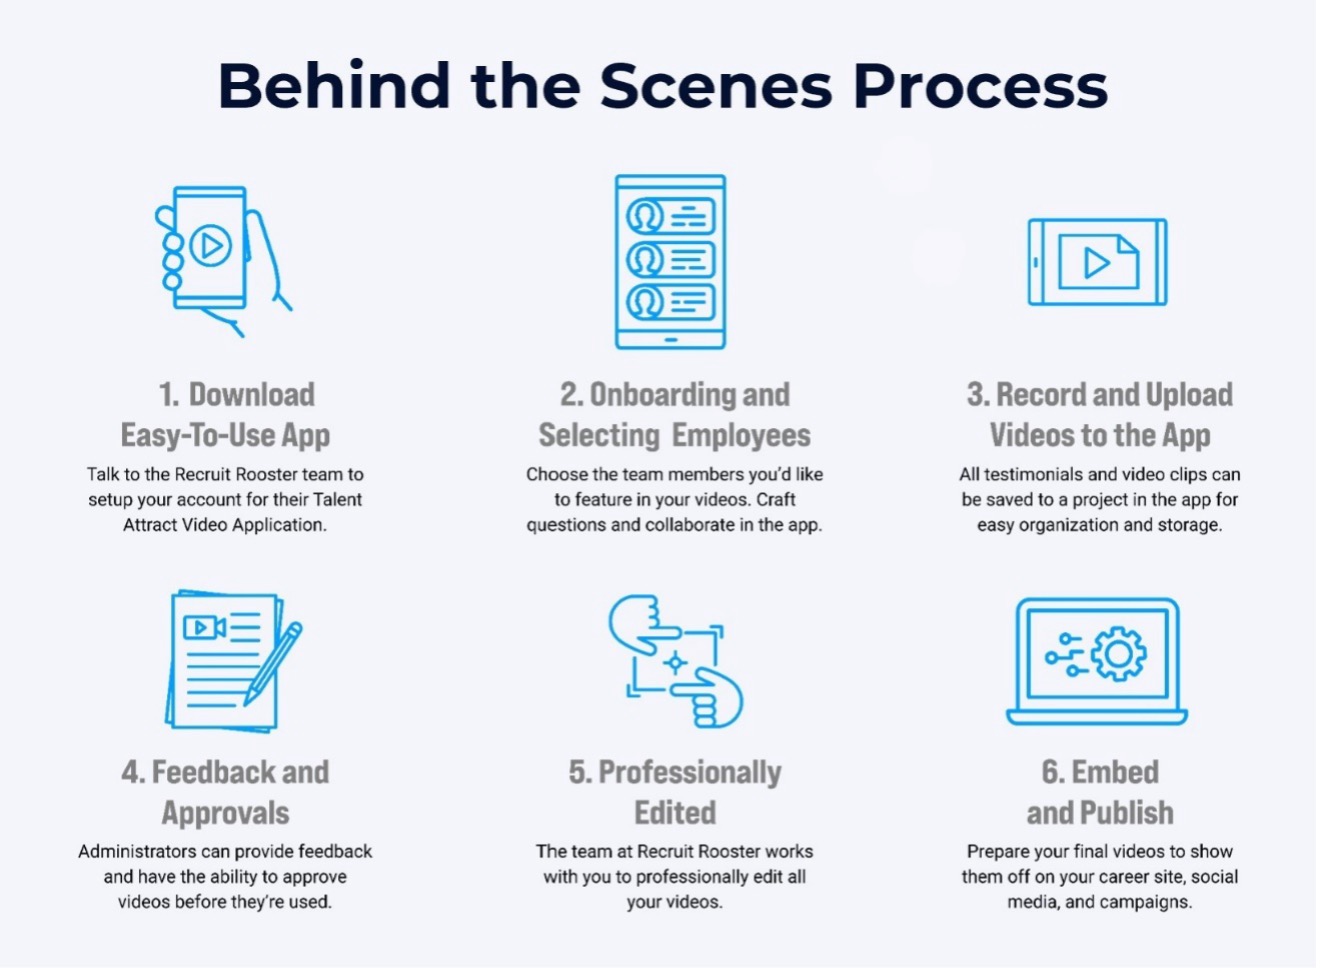 Behind the Scenes Process: 1) Download the Easy-to-Use App 2) Onboarding and Selecting Employees 3) Record and Upload Videos to the App 4) Feedback and Approvals 5) Professionally Edited 6) Embed and Publish